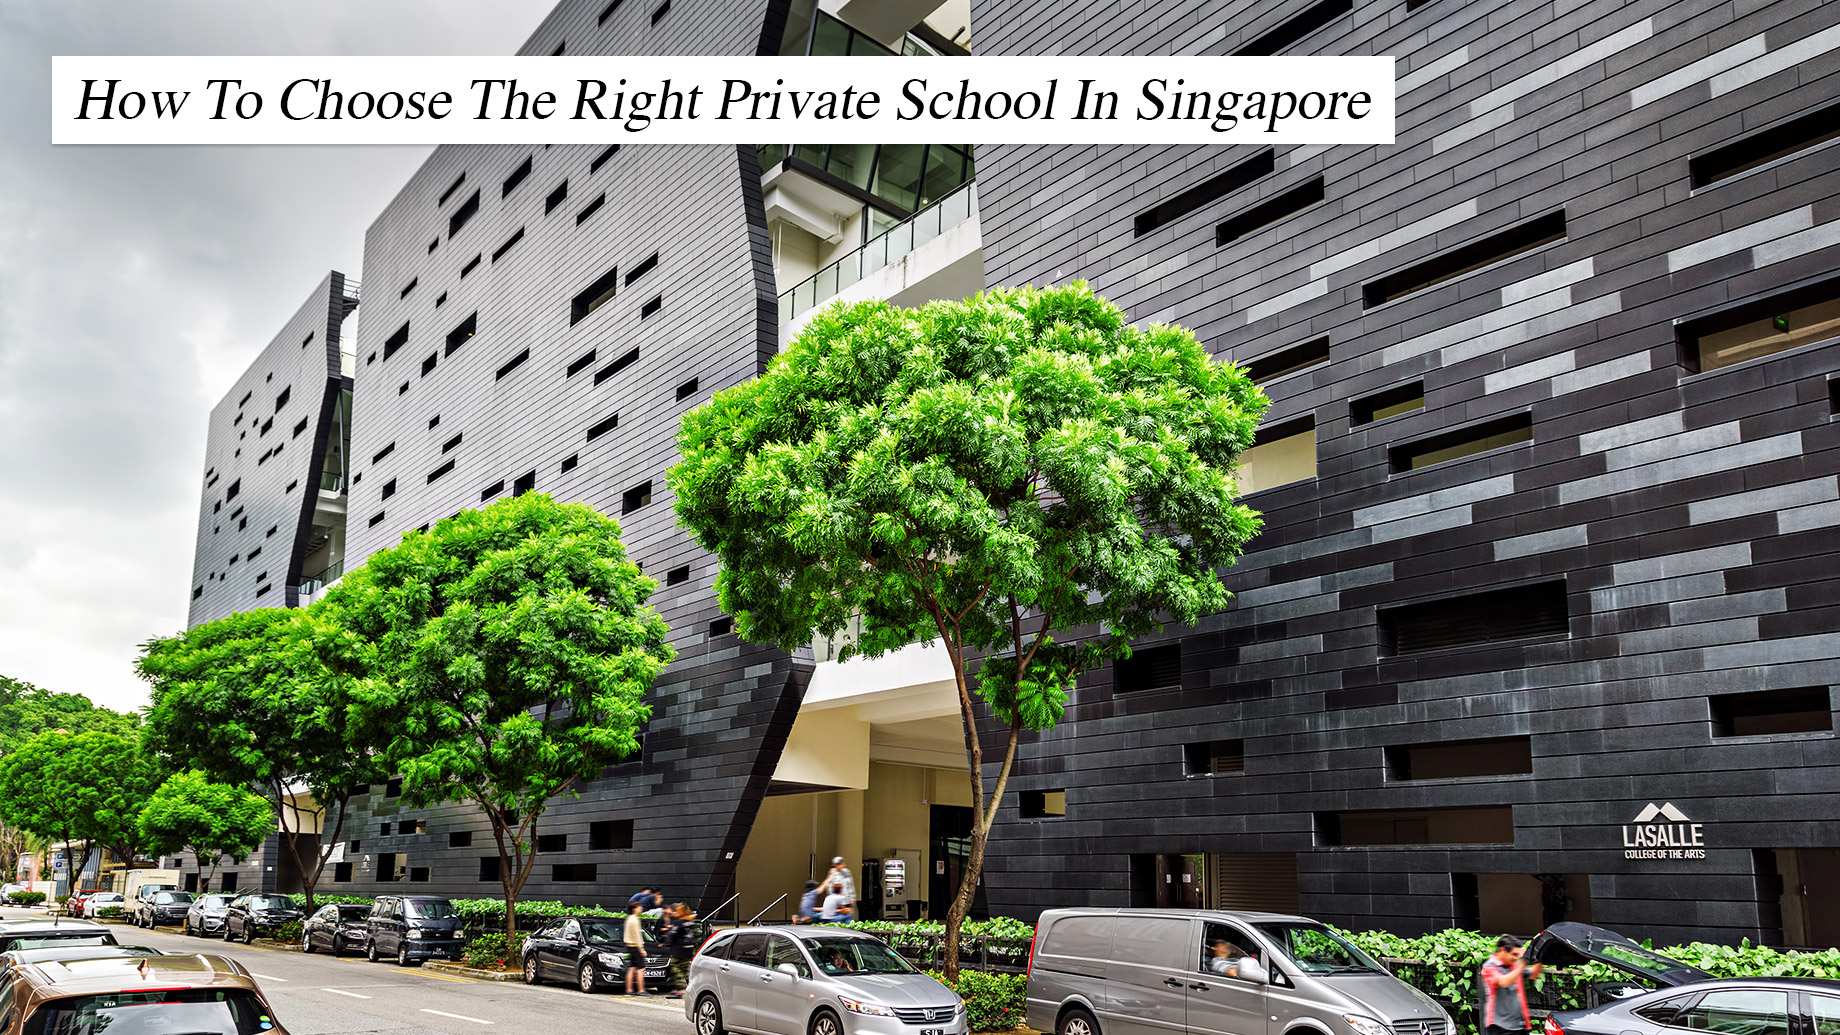 How To Choose The Right Private School In Singapore